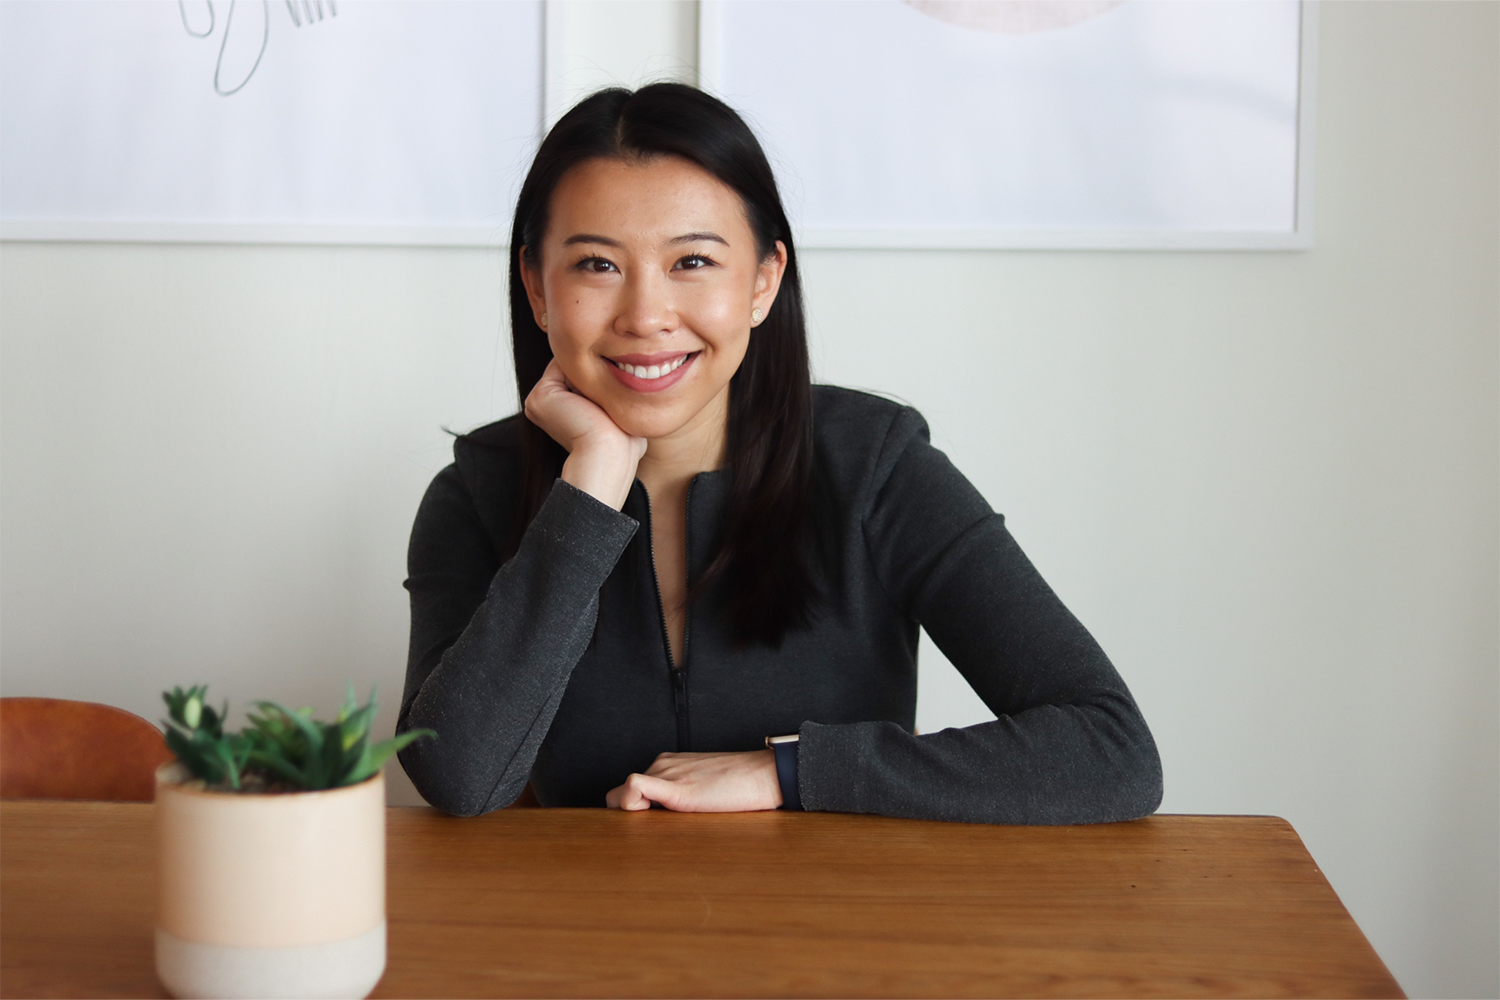 Xenia Chen, founder of Threads